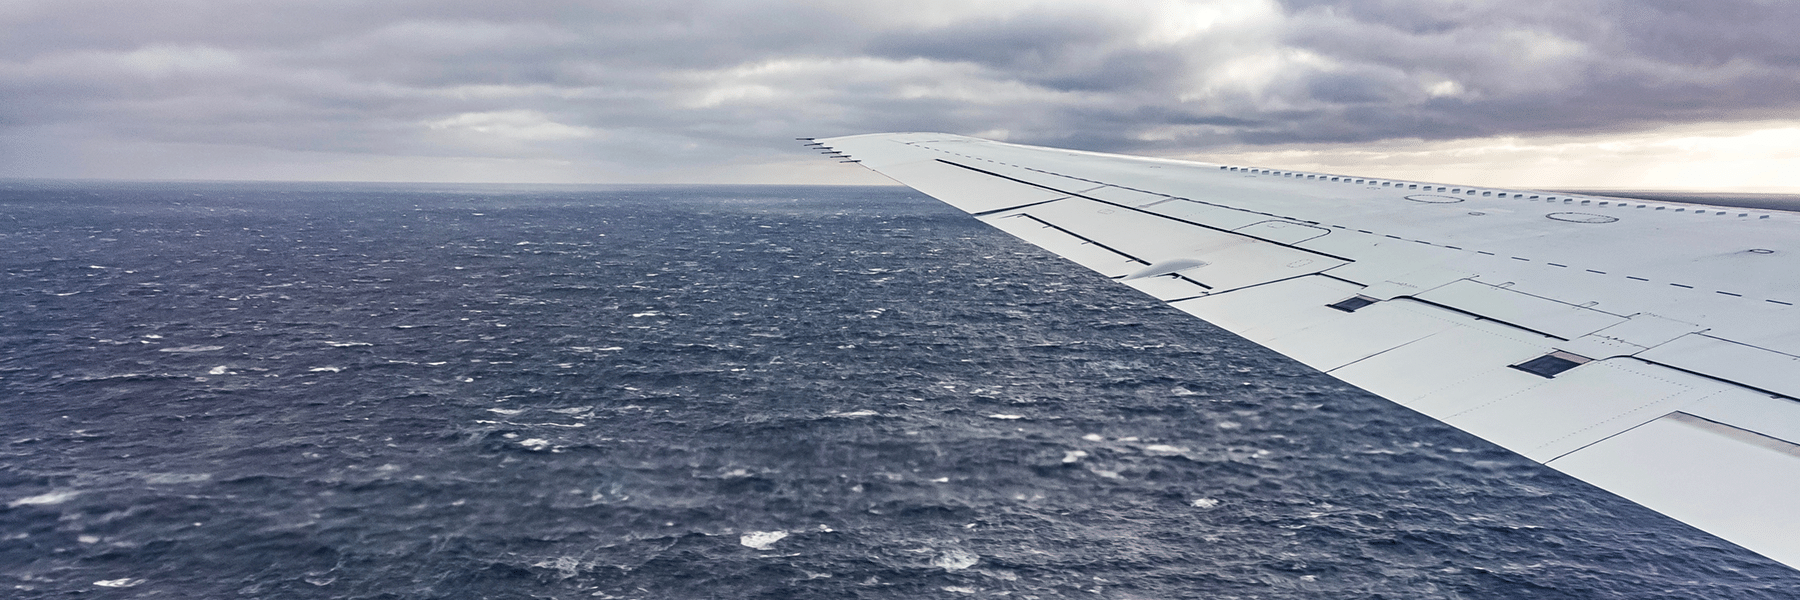 An airplane wing over the ocean with clouds in the background